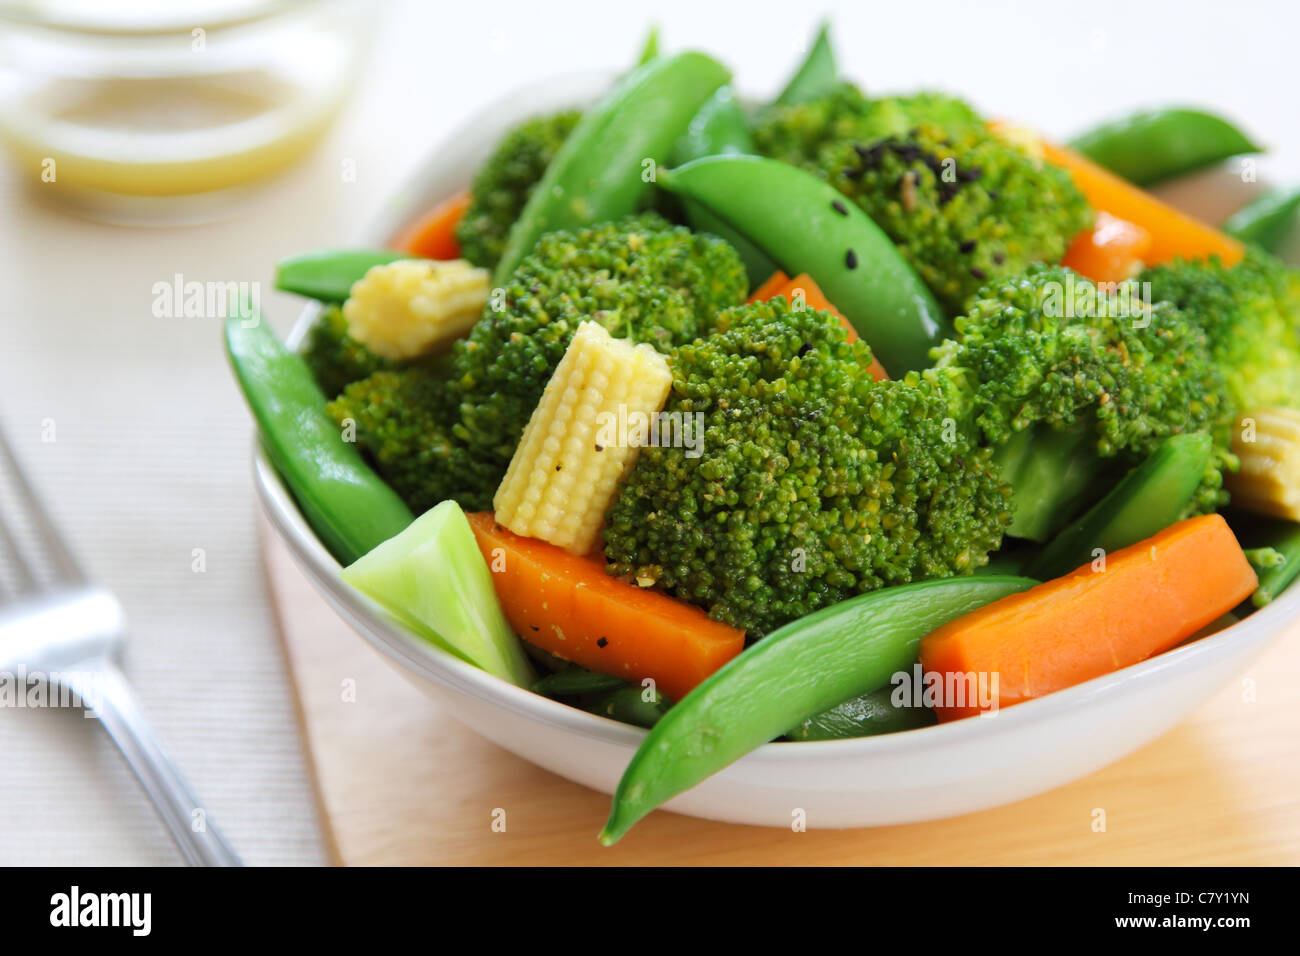 Broccoli salad with carrot ,baby corn and snap pea Stock Photo